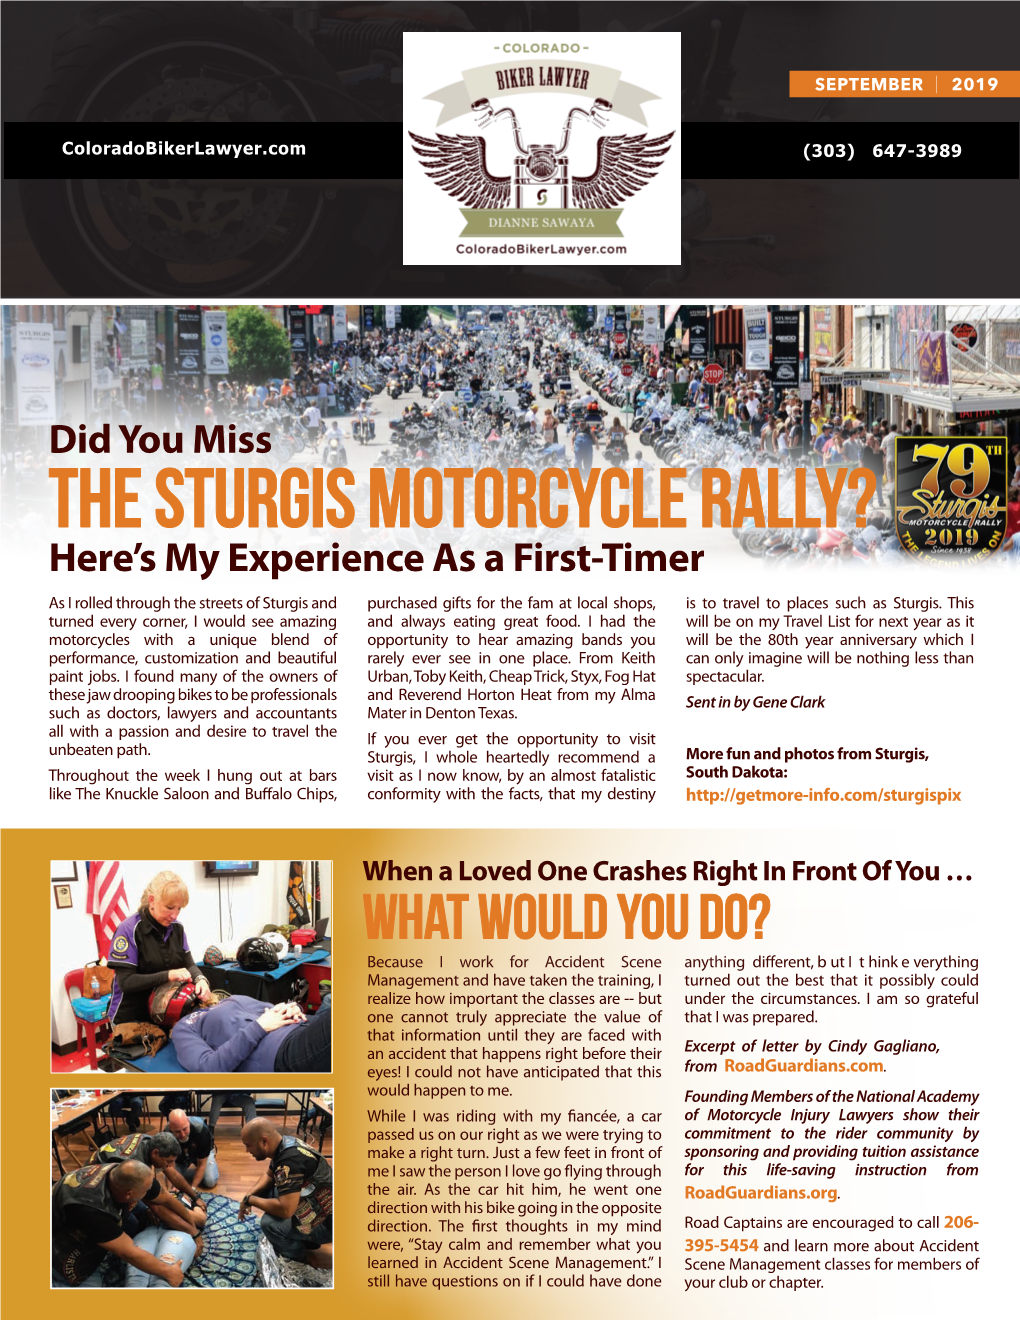 The Sturgis Motorcycle Rally?